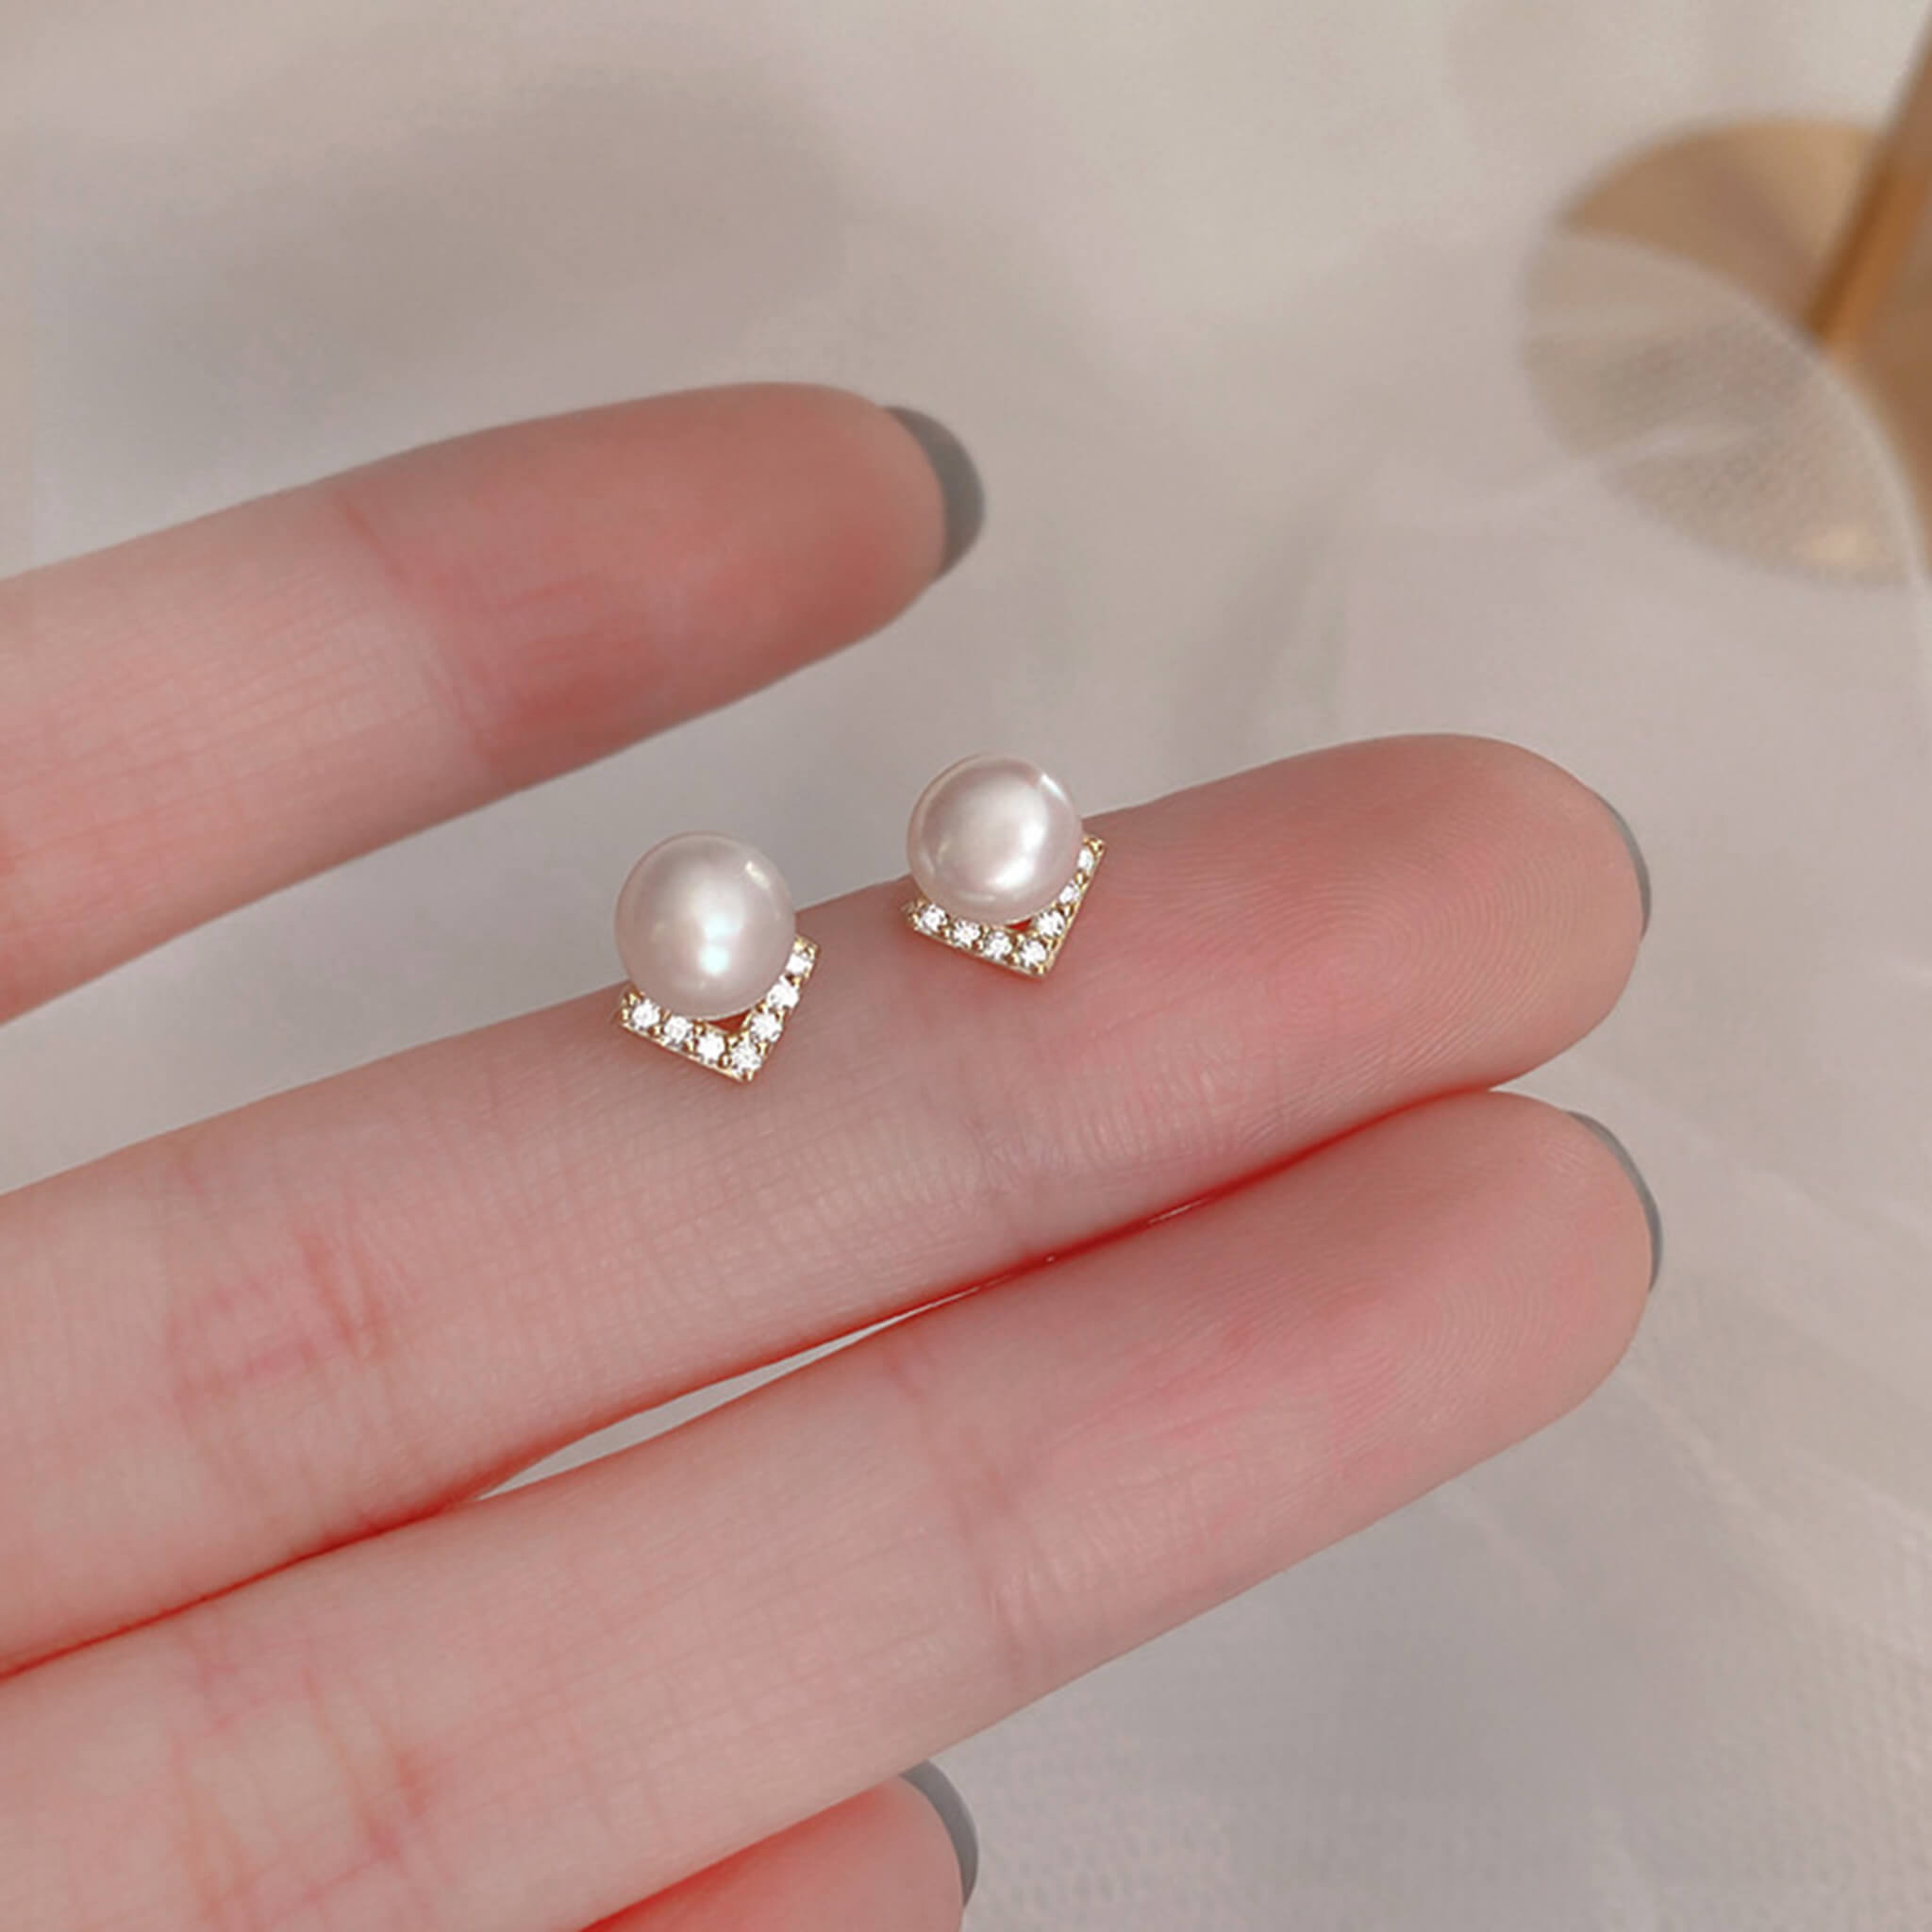 French Vintage 925 Silver Natural Freshwater Pearl Bread Pearl Earrings  UponBasics   